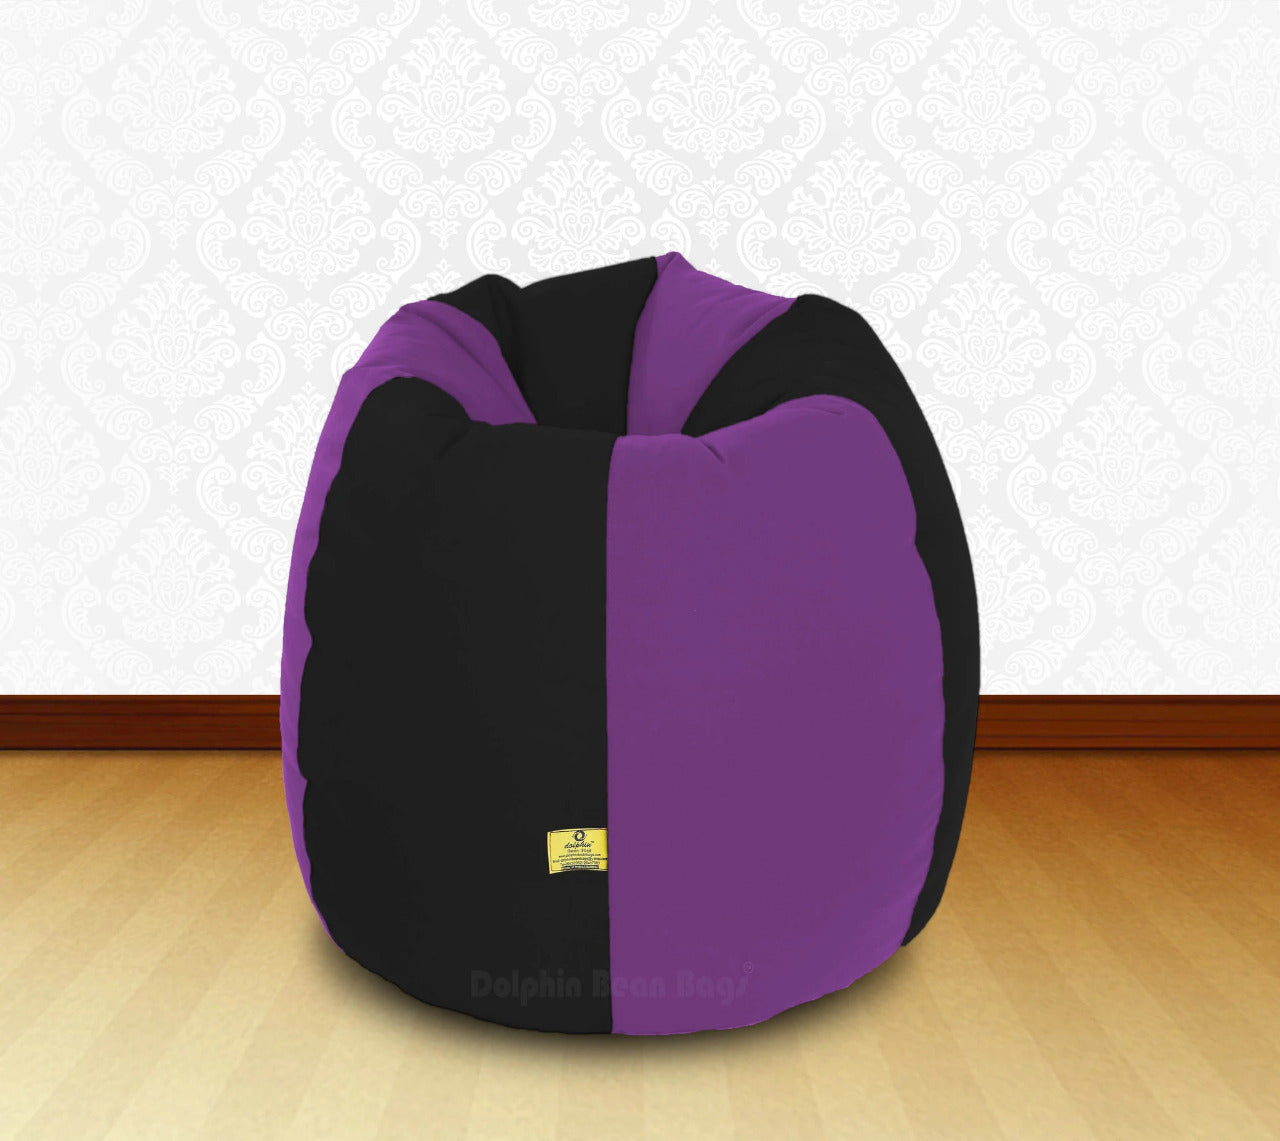 Bean Bag : XL Black/Purple-FABRIC-FILLED & WASHABLE (with Beans)